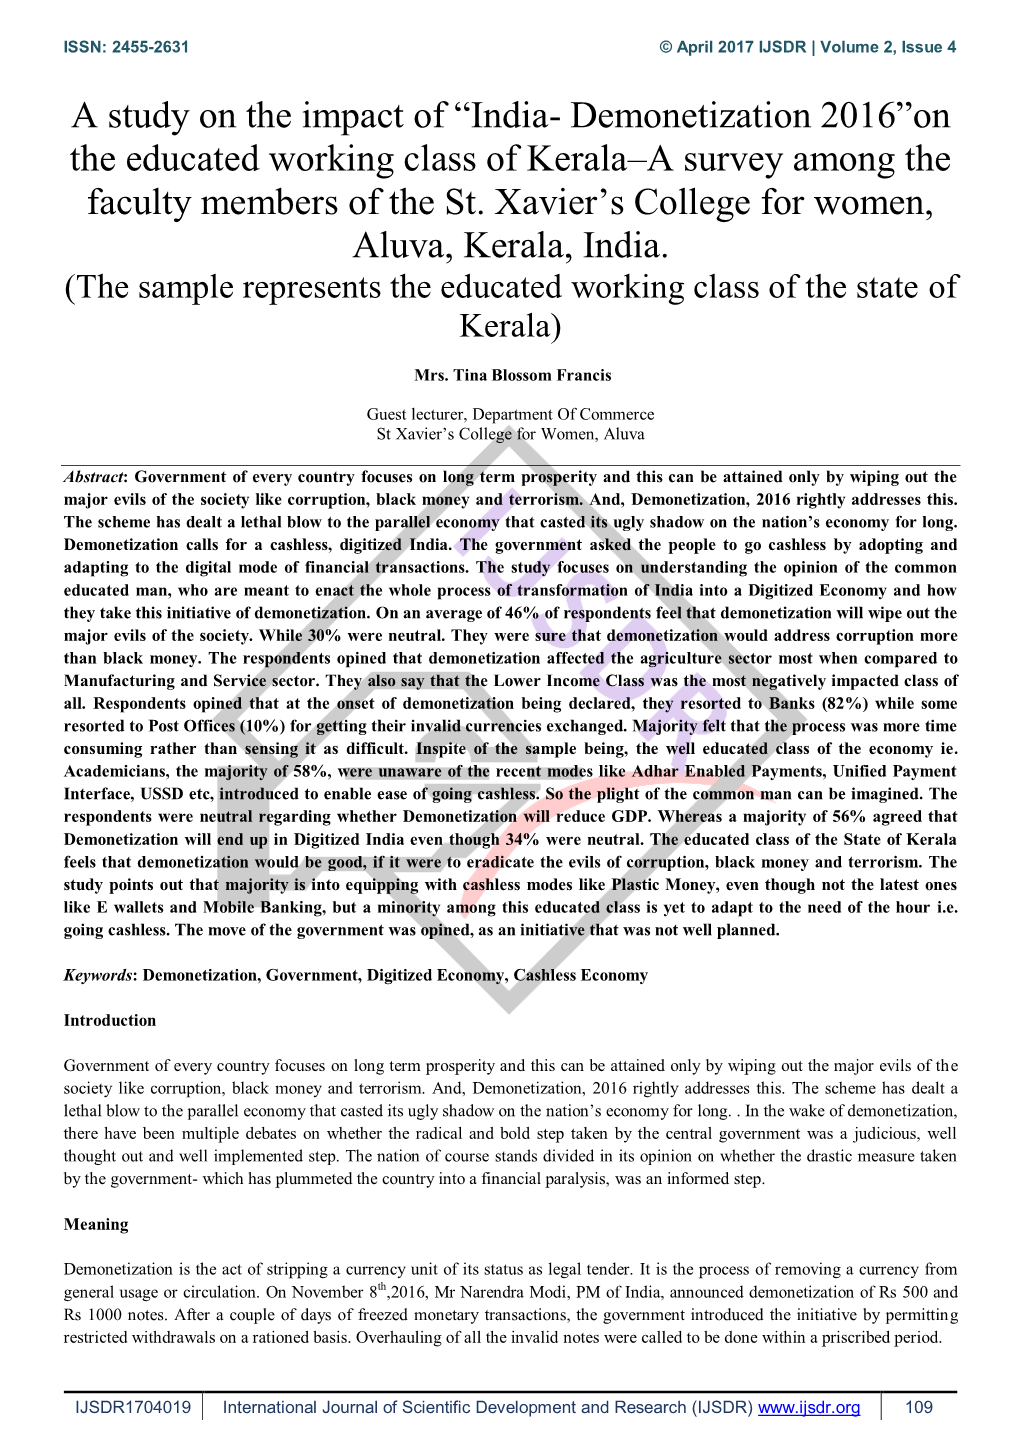 India- Demonetization 2016”On the Educated Working Class of Kerala–A Survey Among the Faculty Members of the St